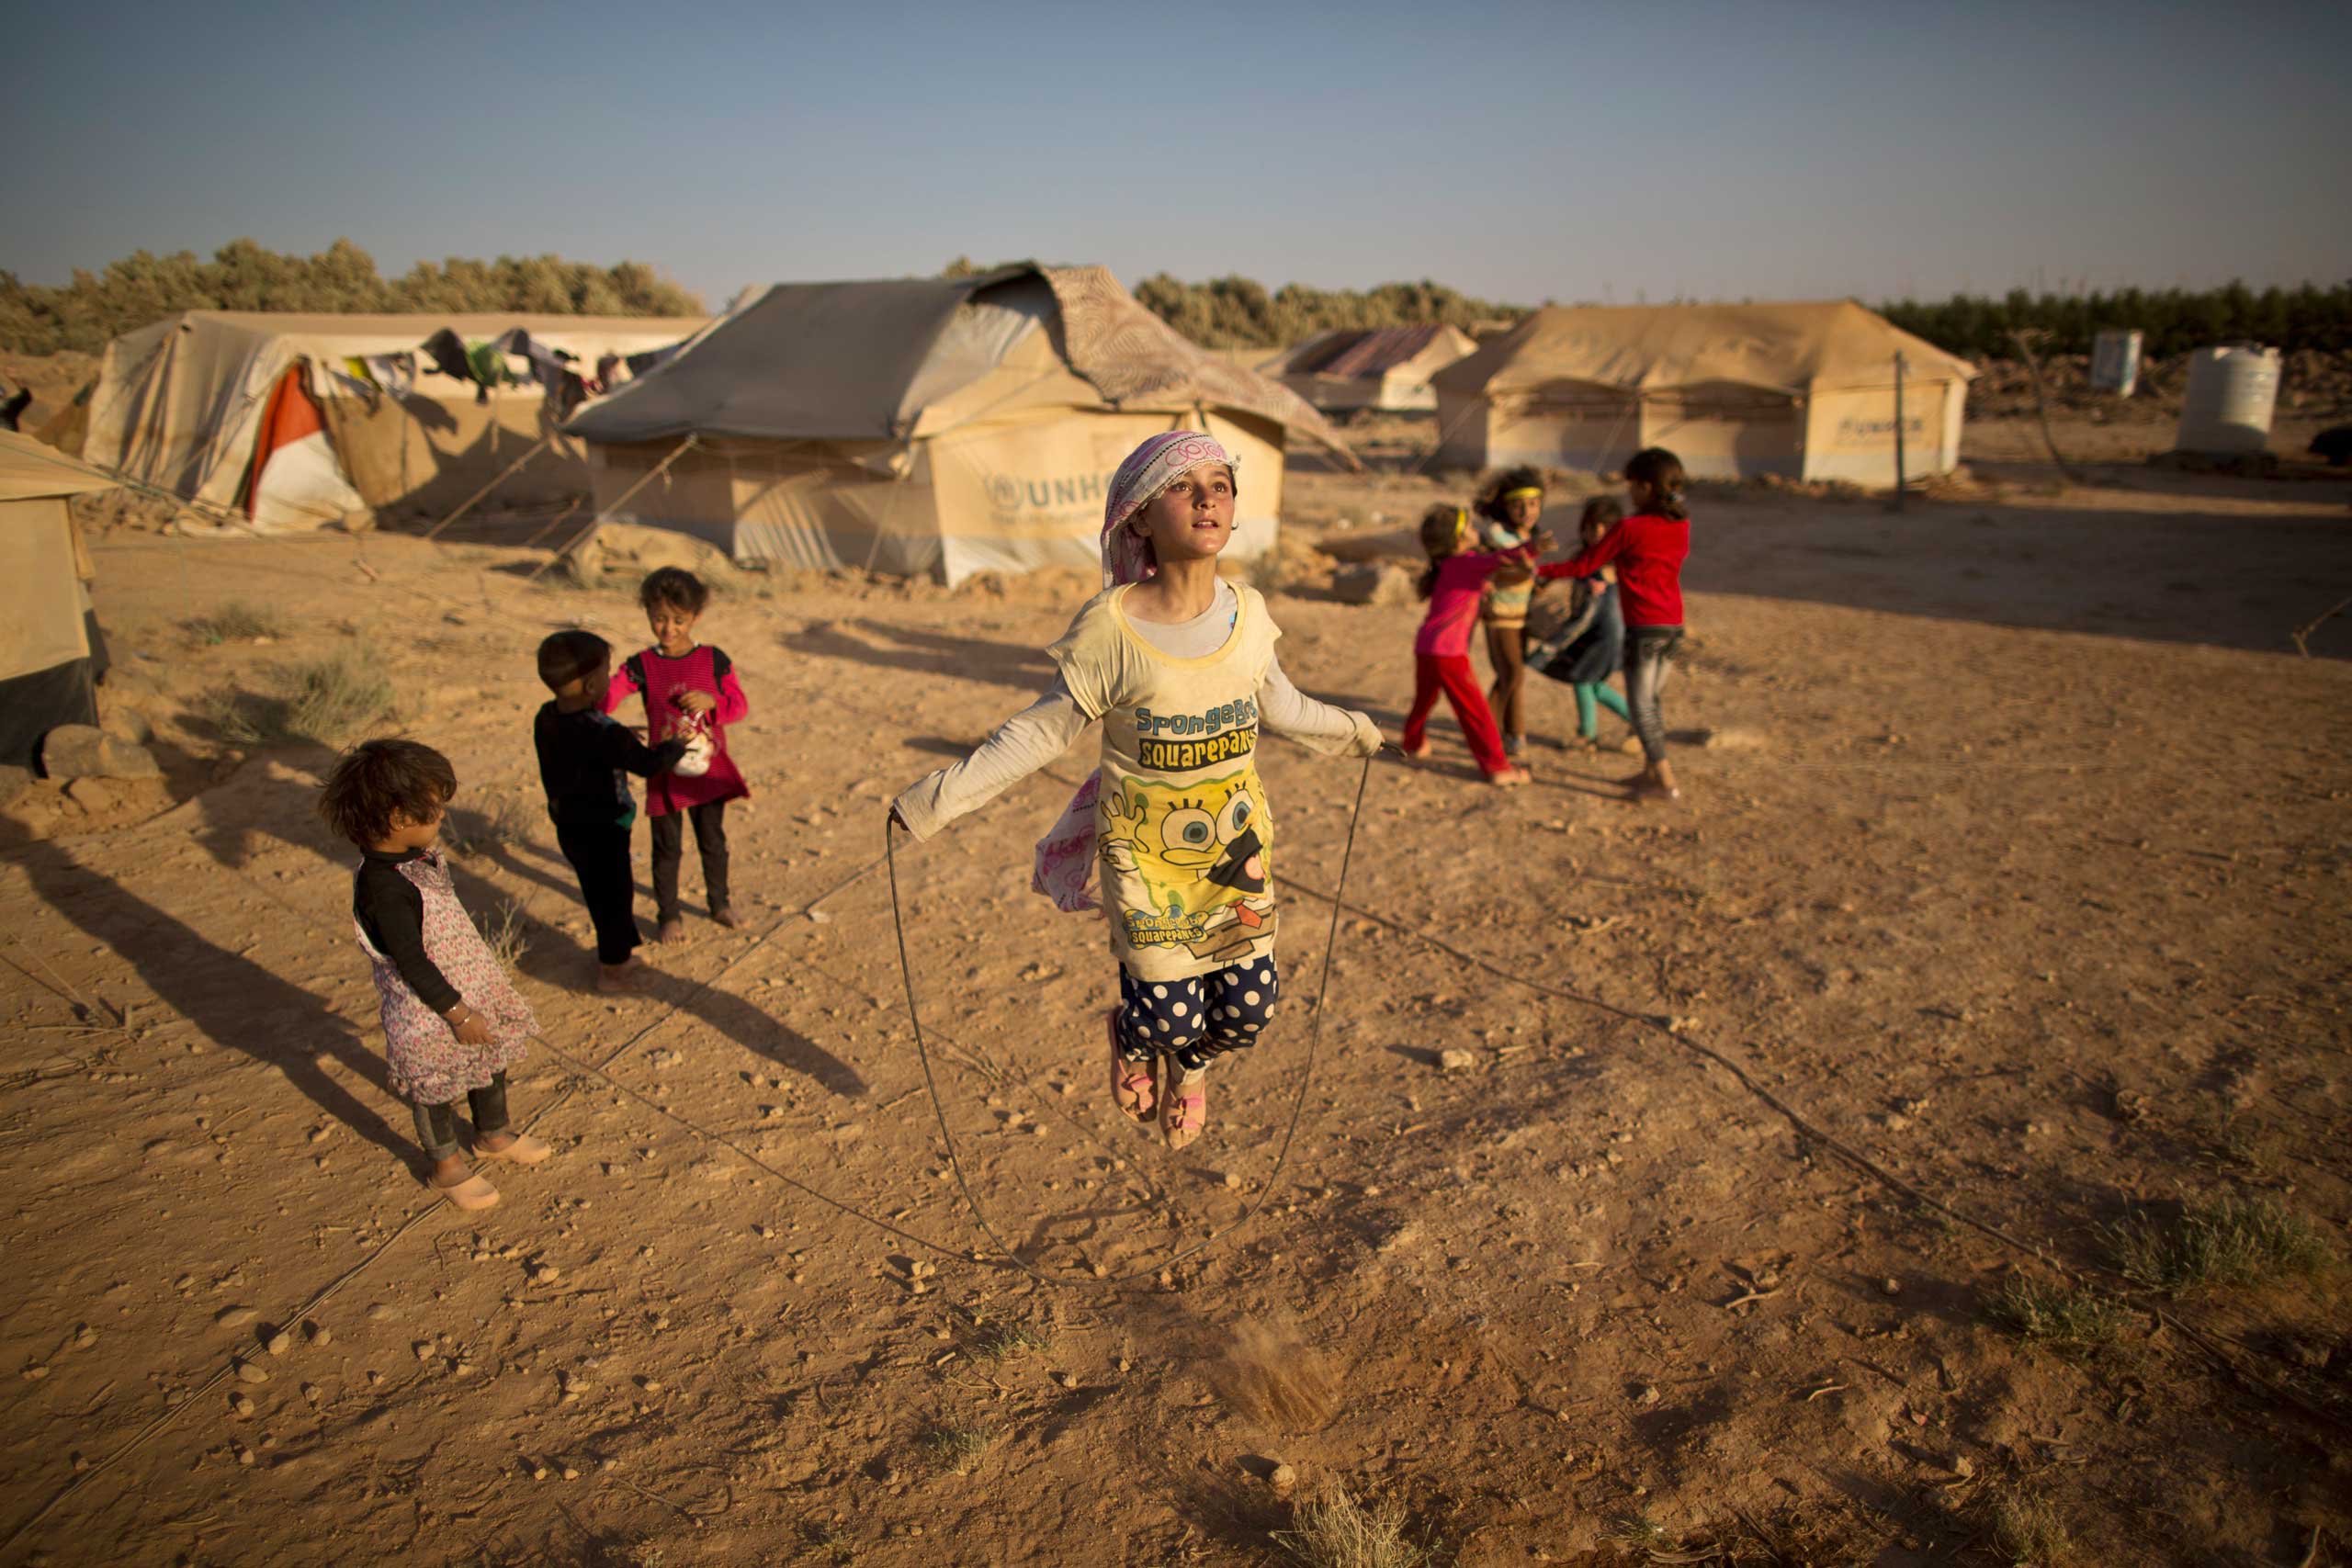 Syrian refugee girl, Zubaida Faisal, 10, skips a rope while she and other children play near their tents at an informal tented settlement near the Syrian border on the outskirts of Mafraq, Jordan. July 19, 2015.